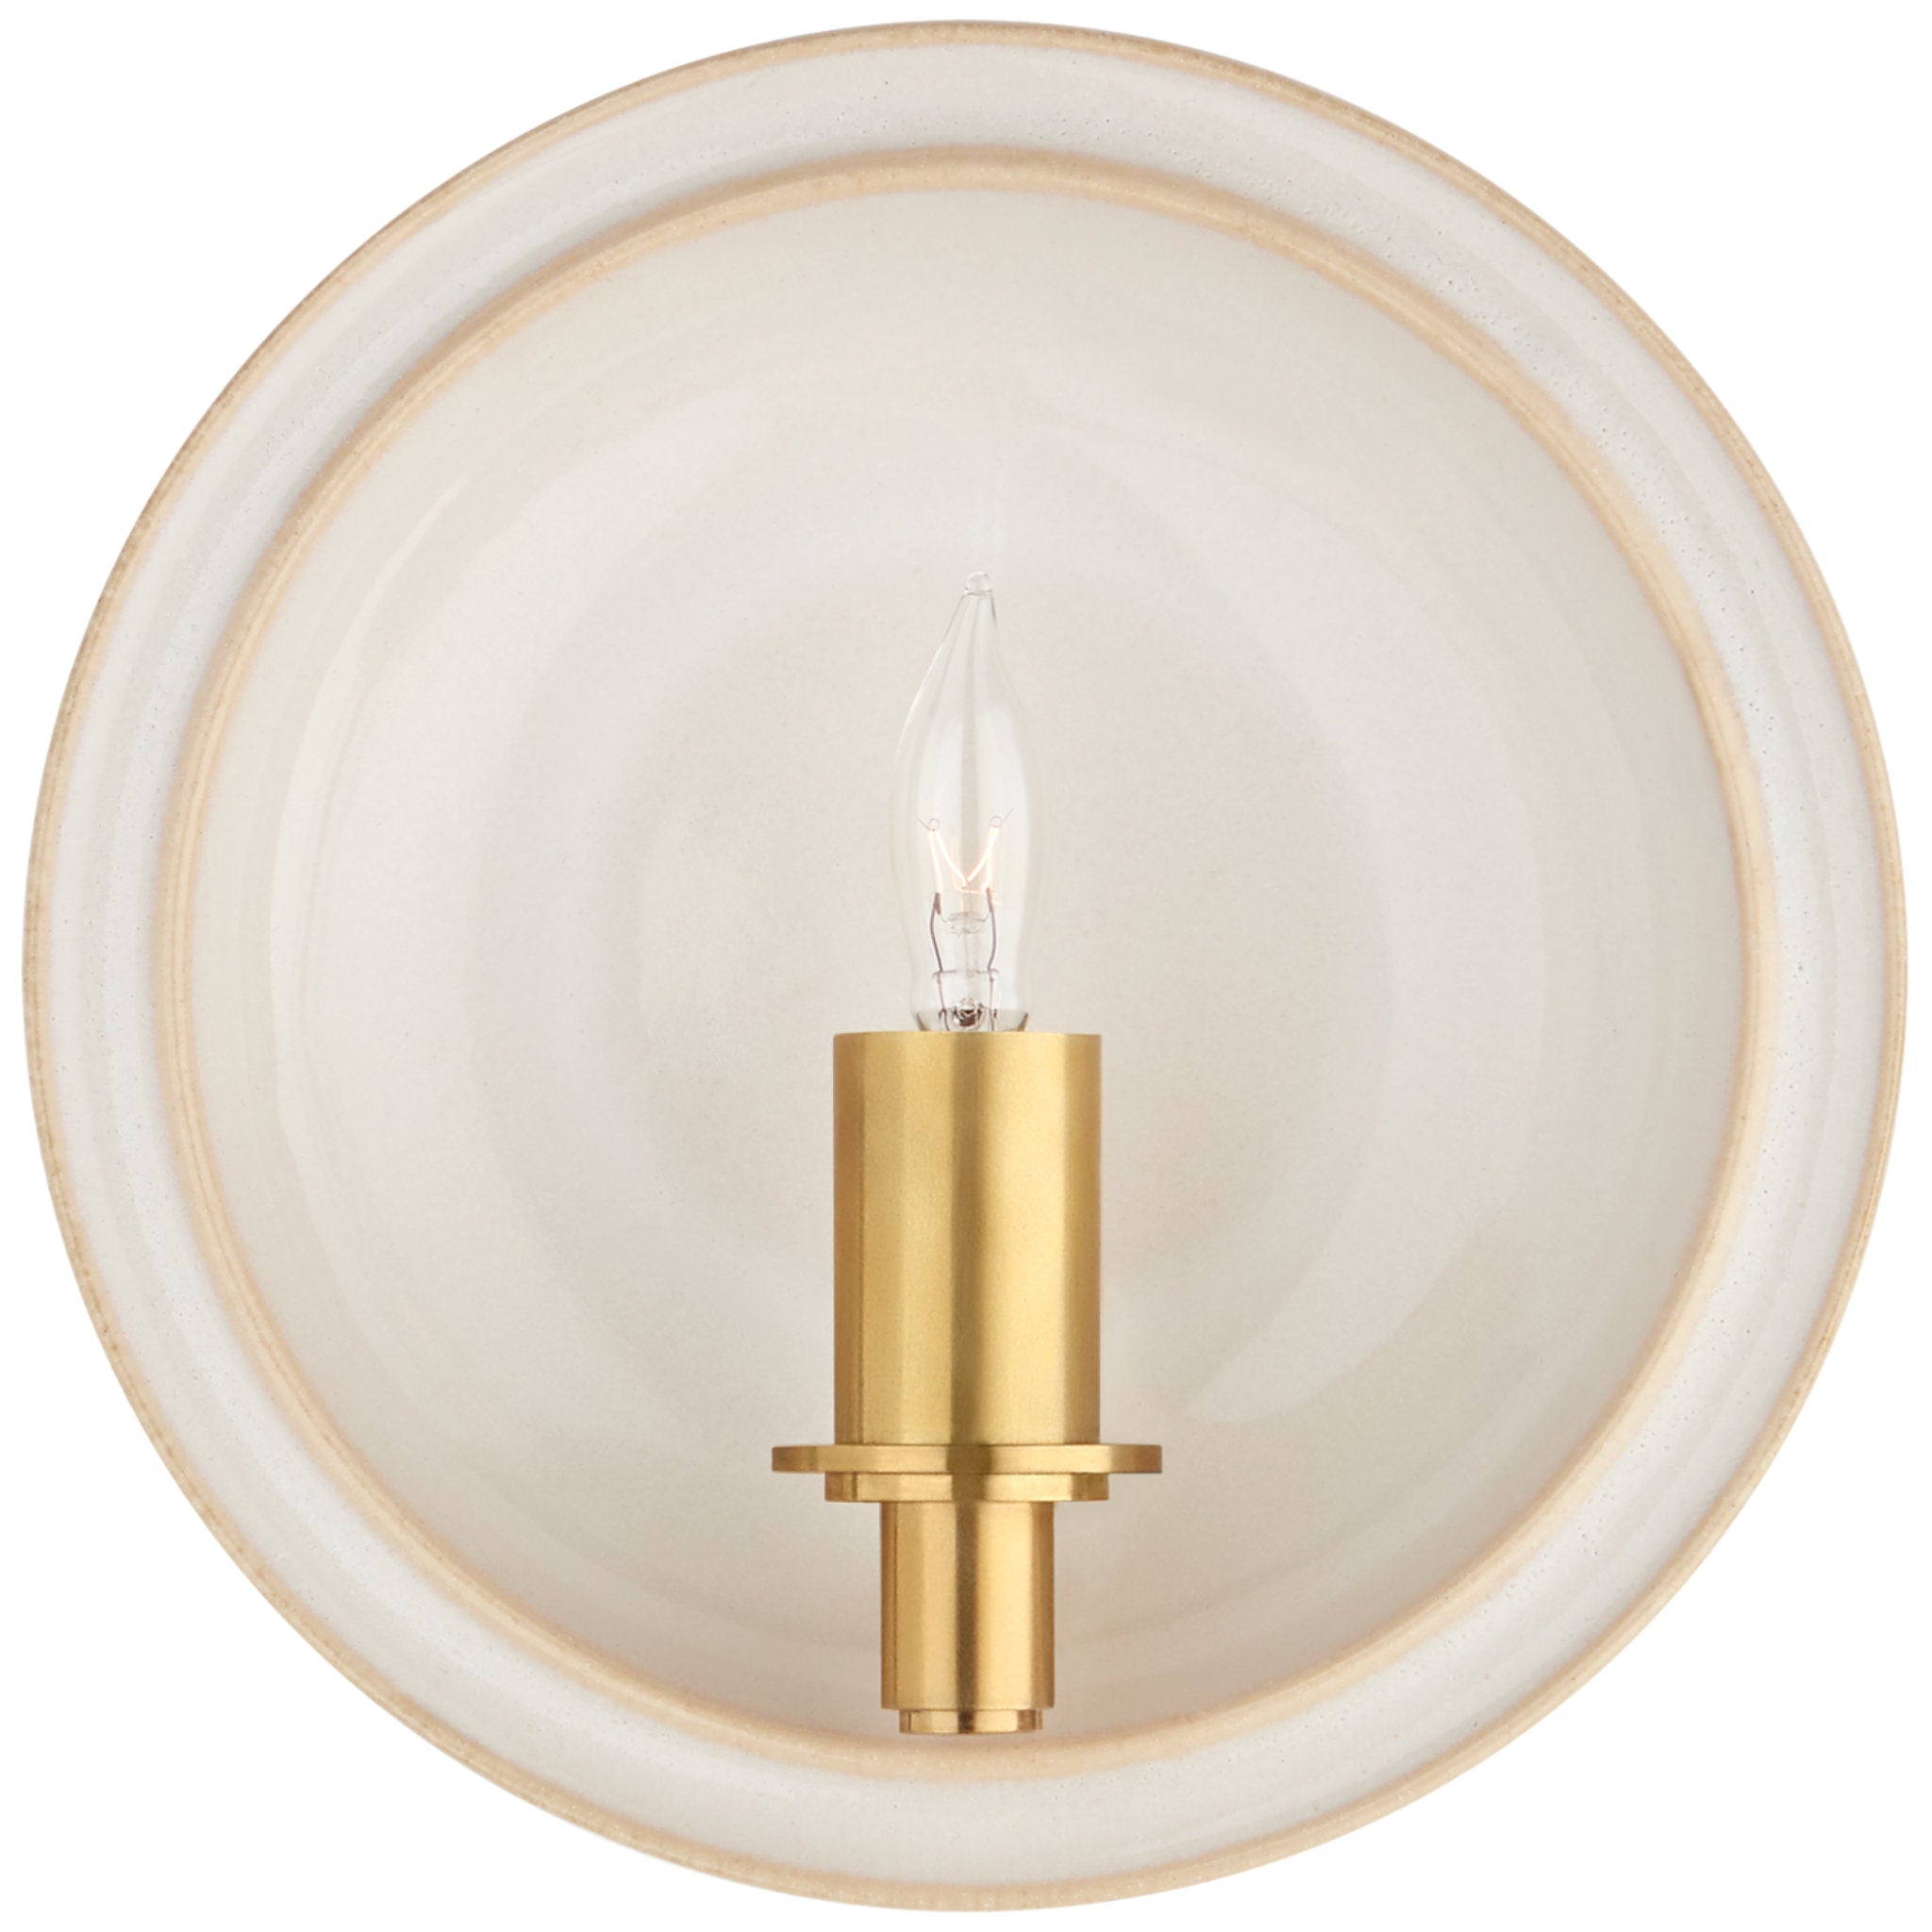 Christopher Spitzmiller Leeds Small Round Sconce in Ivory